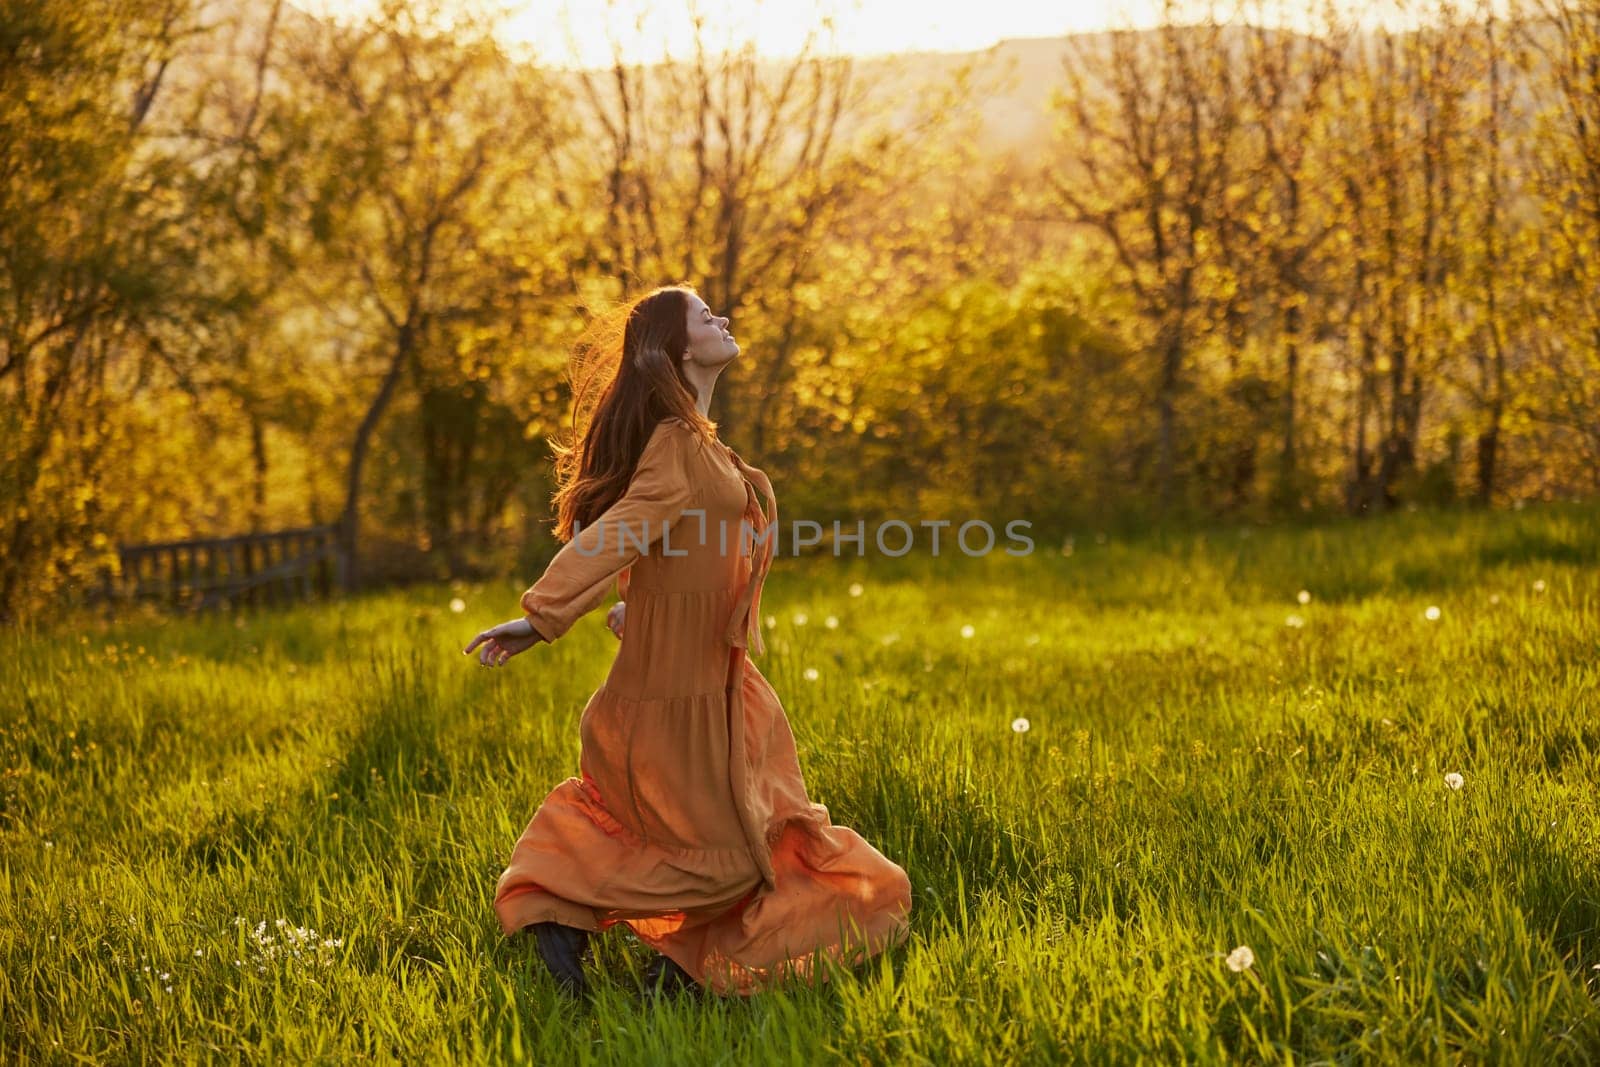 a joyful woman runs through a green field during the sunset enjoying a warm summer day and nature. Horizontal photography in nature by Vichizh